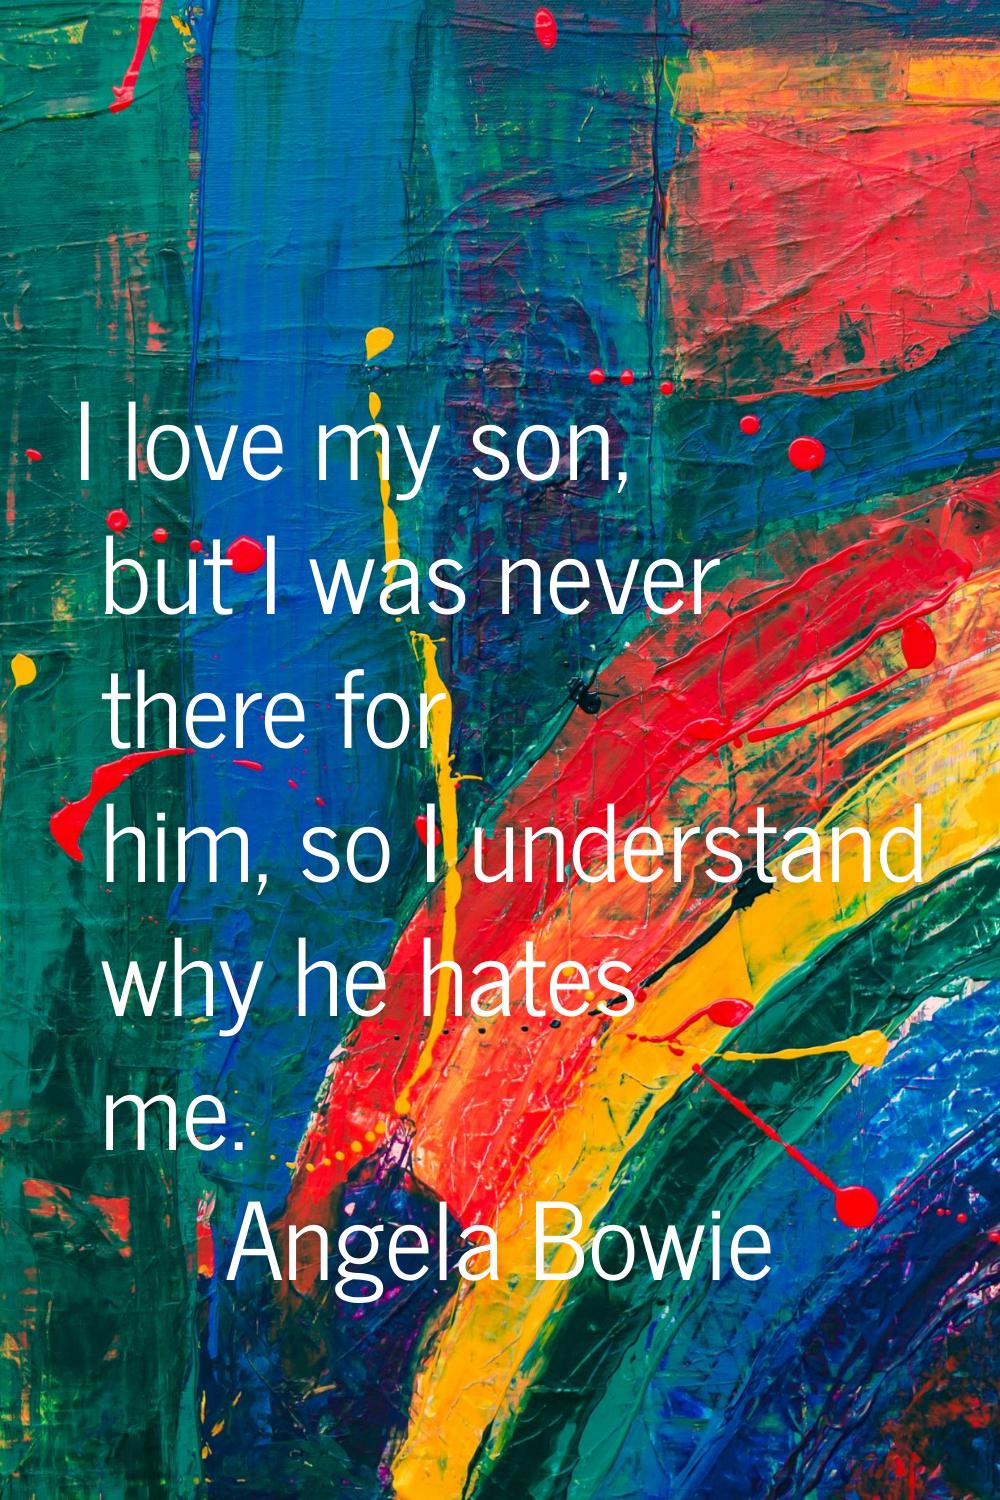 I love my son, but I was never there for him, so I understand why he hates me.